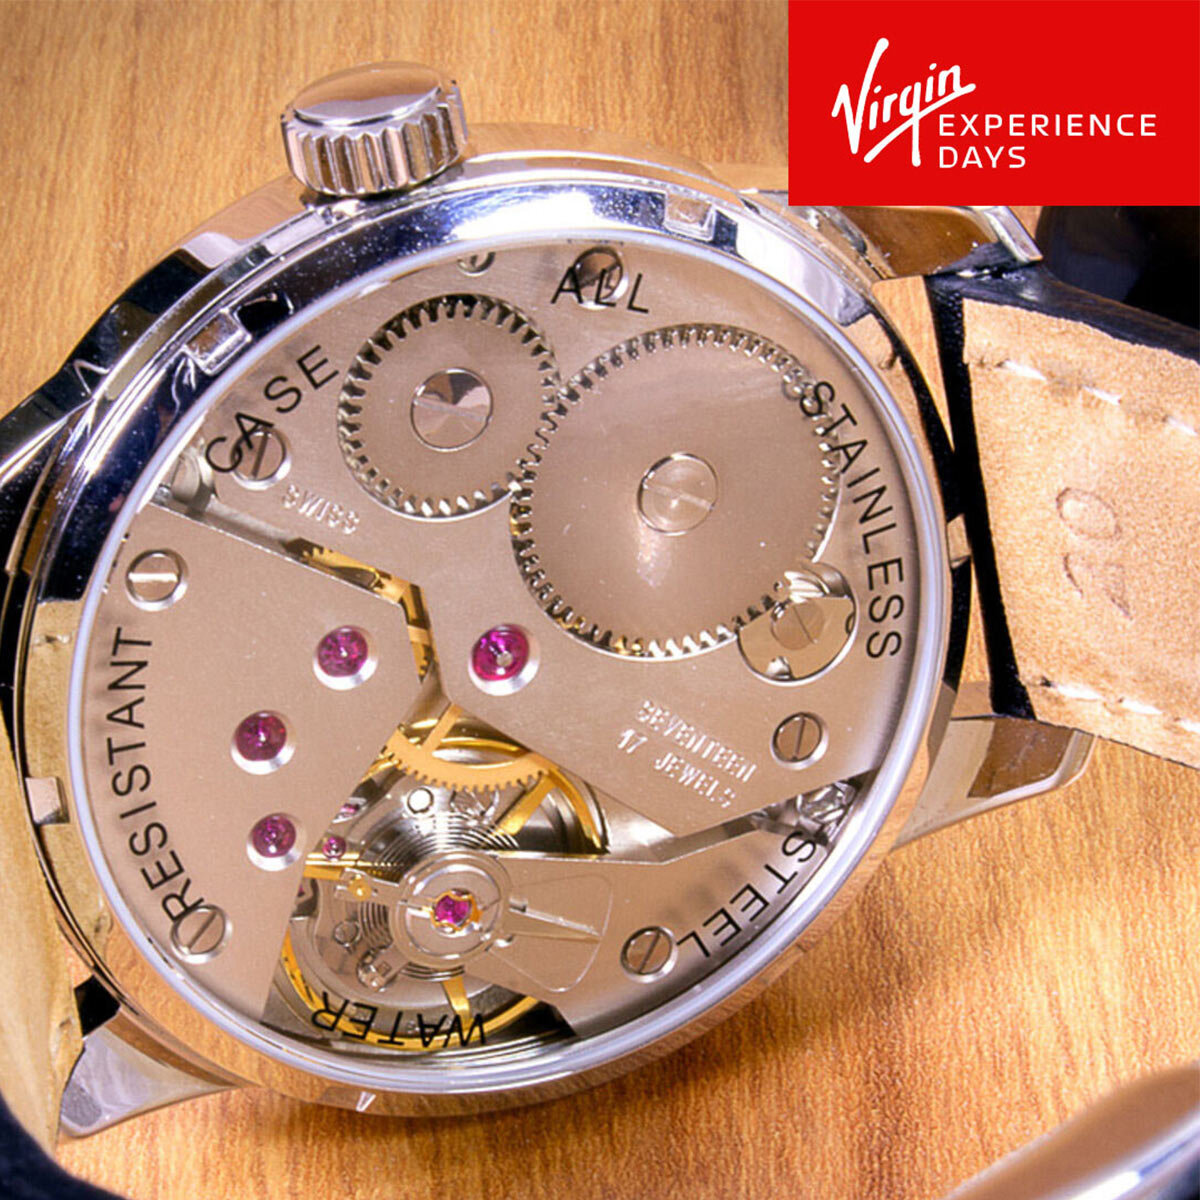 Virgin Experience Days Build Your Own Watch & History of Watchmaking at the British Horological Institute with 1 Overnight Stay (18 Years +)